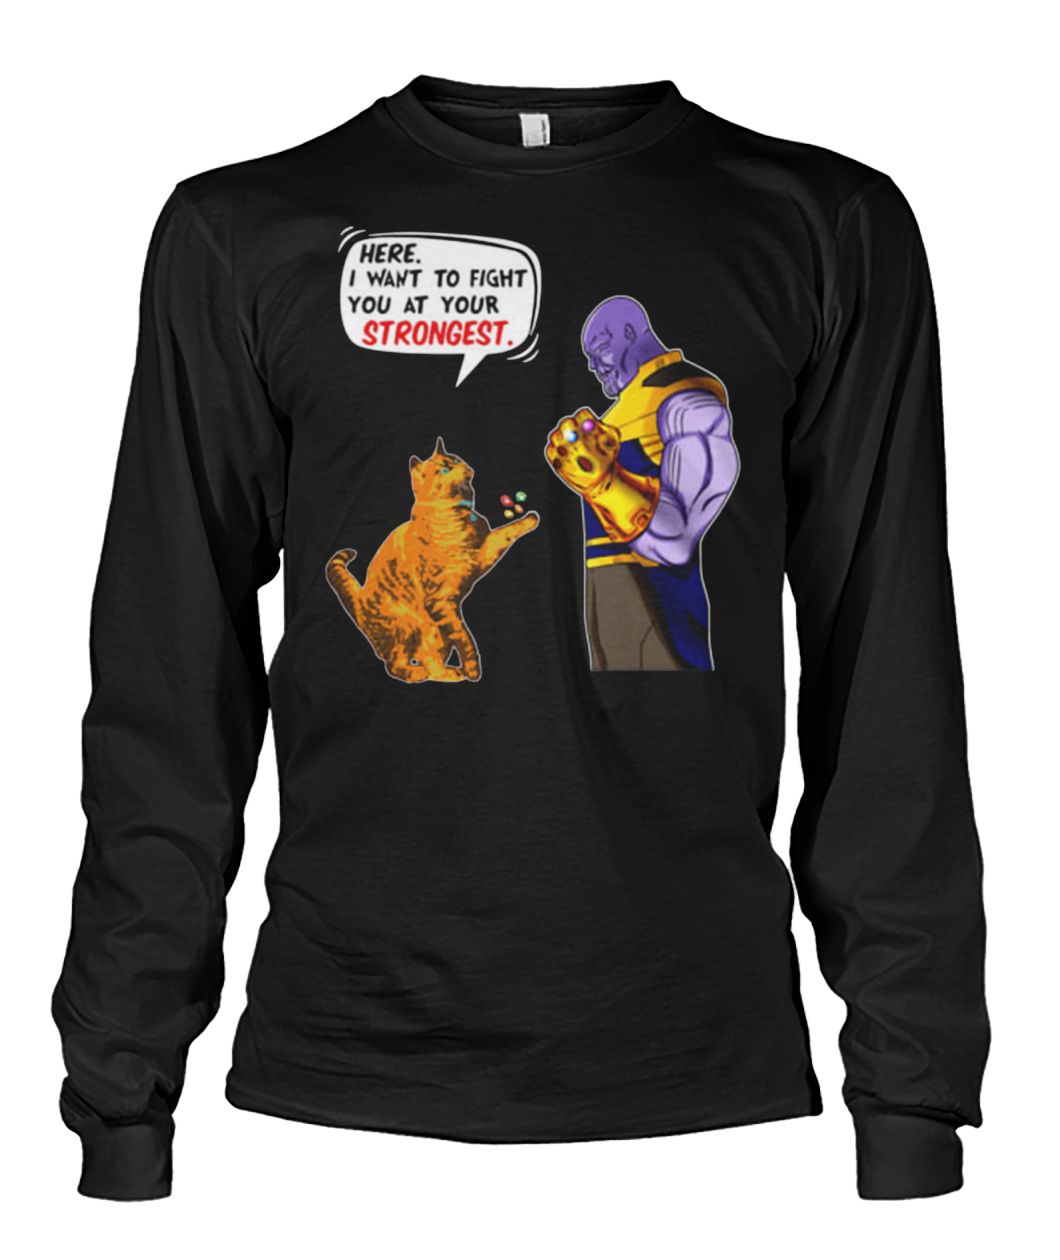 Cat Goose vs Thanos here I want to fight you at your strongest unisex long sleeve